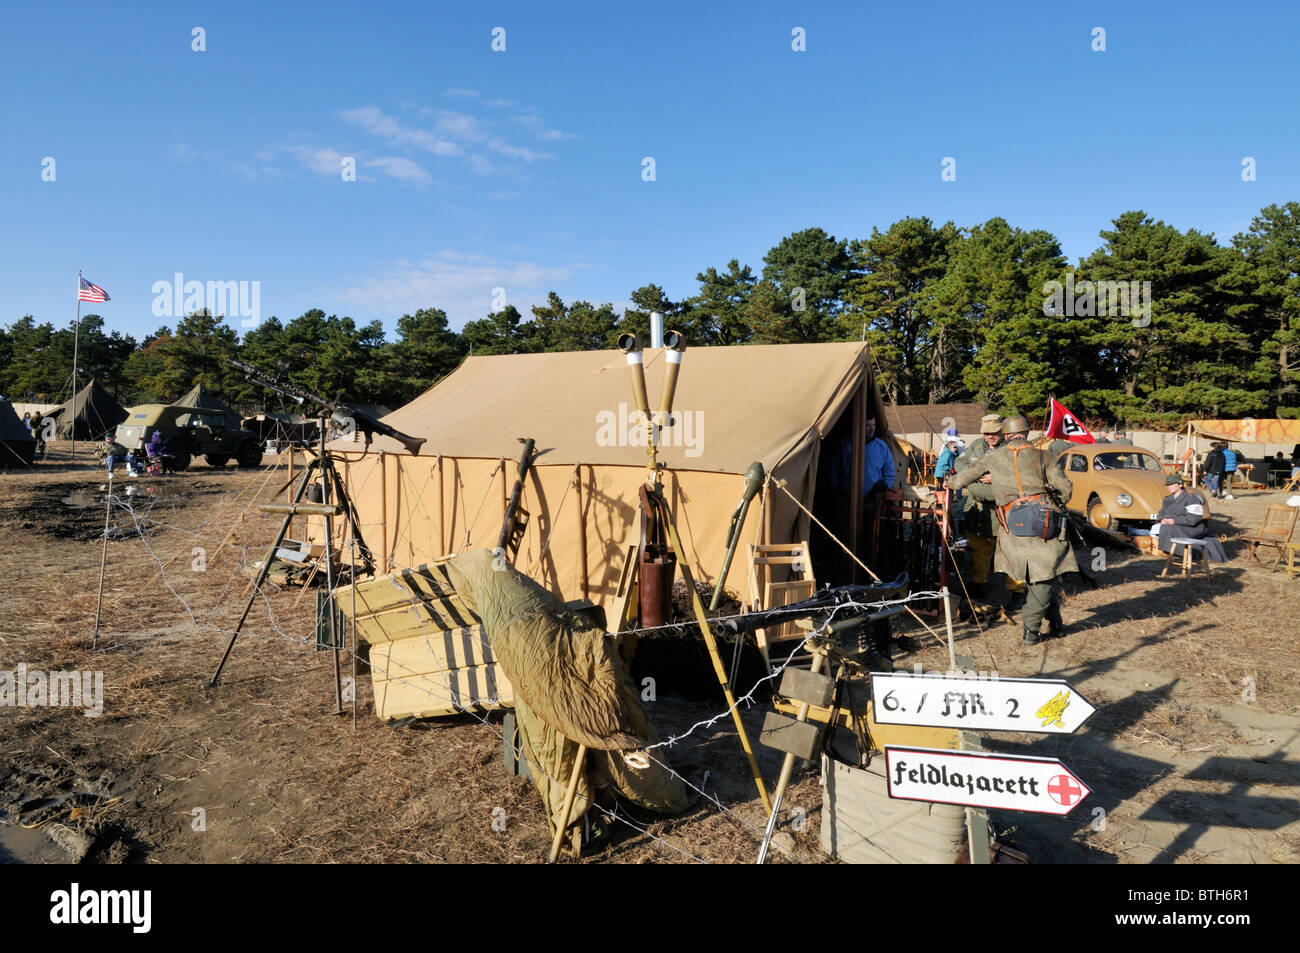 Reenactment of camp of nazi german soldiers during WWII at Open House of Camp Edwards, Cape Cod, Massachusetts USA Stock Photo